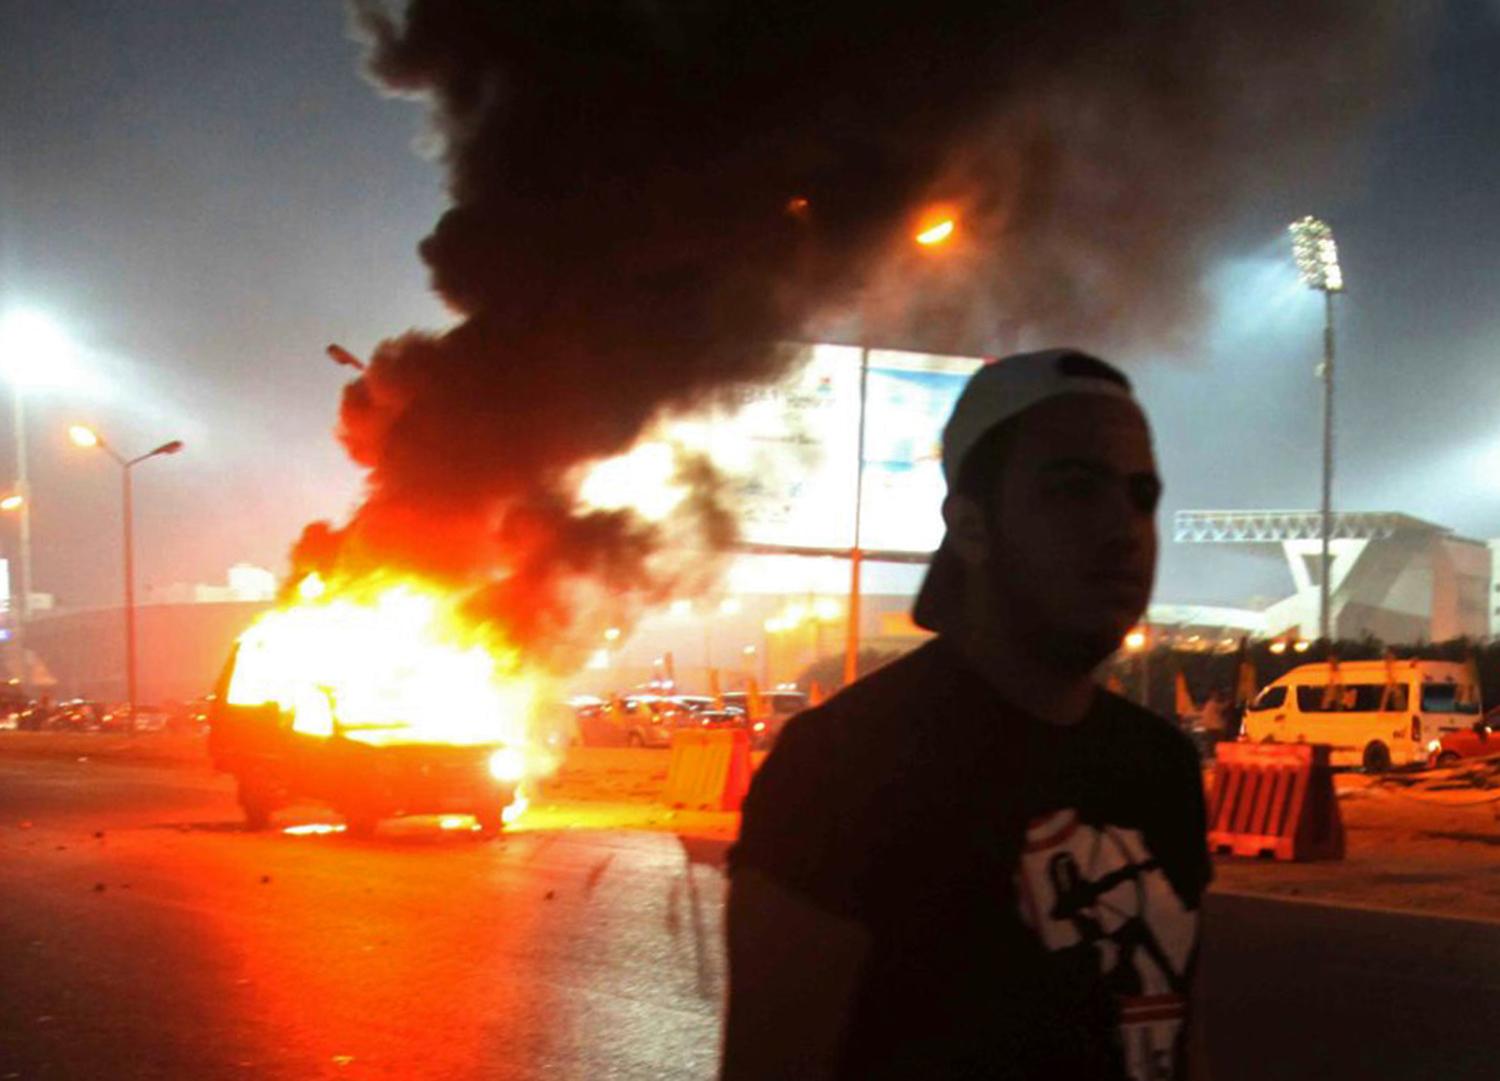 Rioters during a soccer match in Egypt